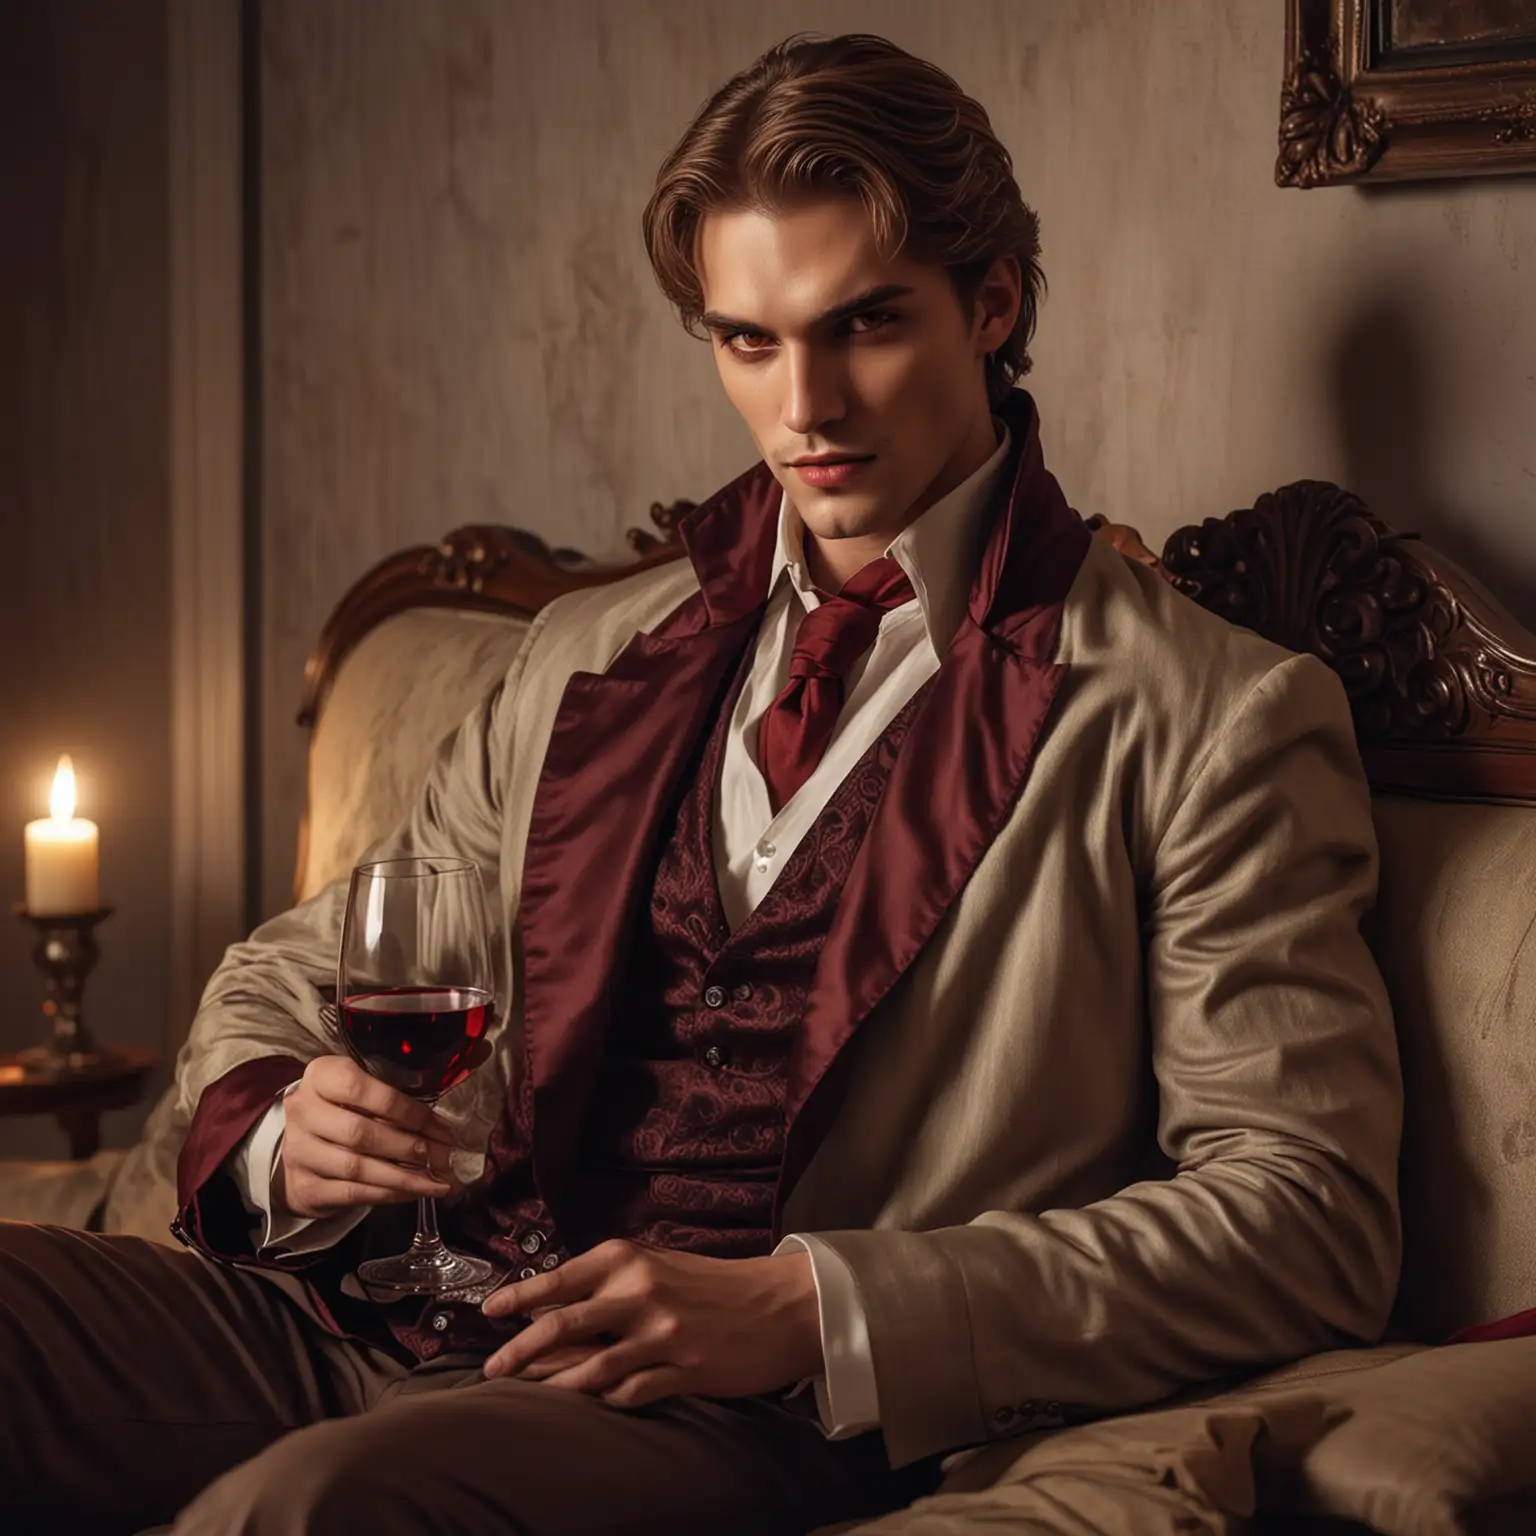 A male Toreador vampire, handsome, red glowing eyes, expensive clothing, light brown hair, sitting on a sofa, holding a glass of wine, realistic